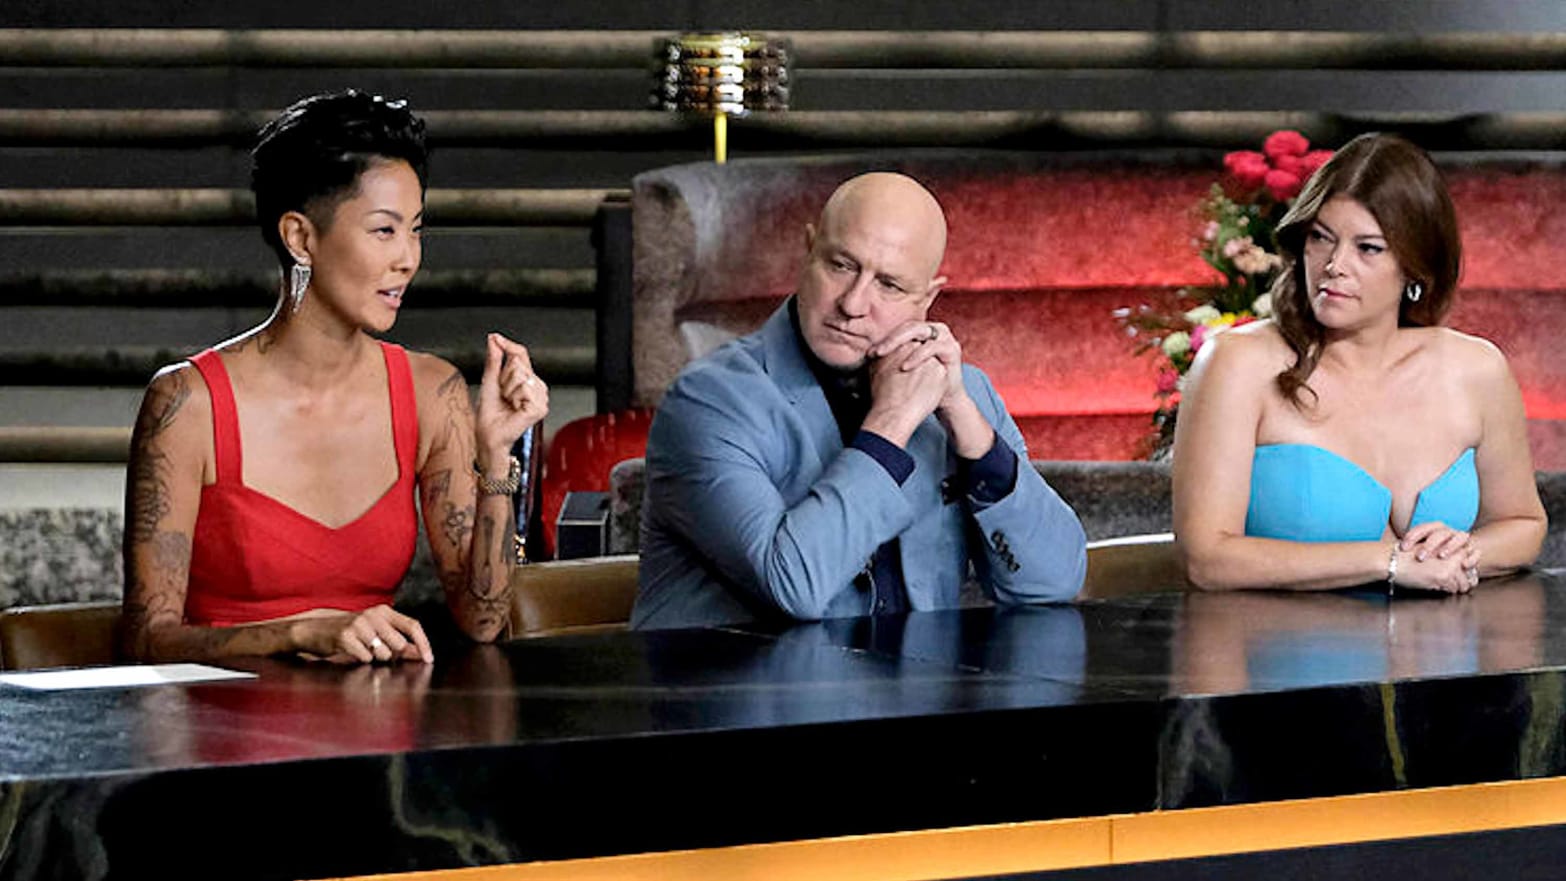 Pictured: Kristen Kish, Tom Colicchio, Gail Simmons.